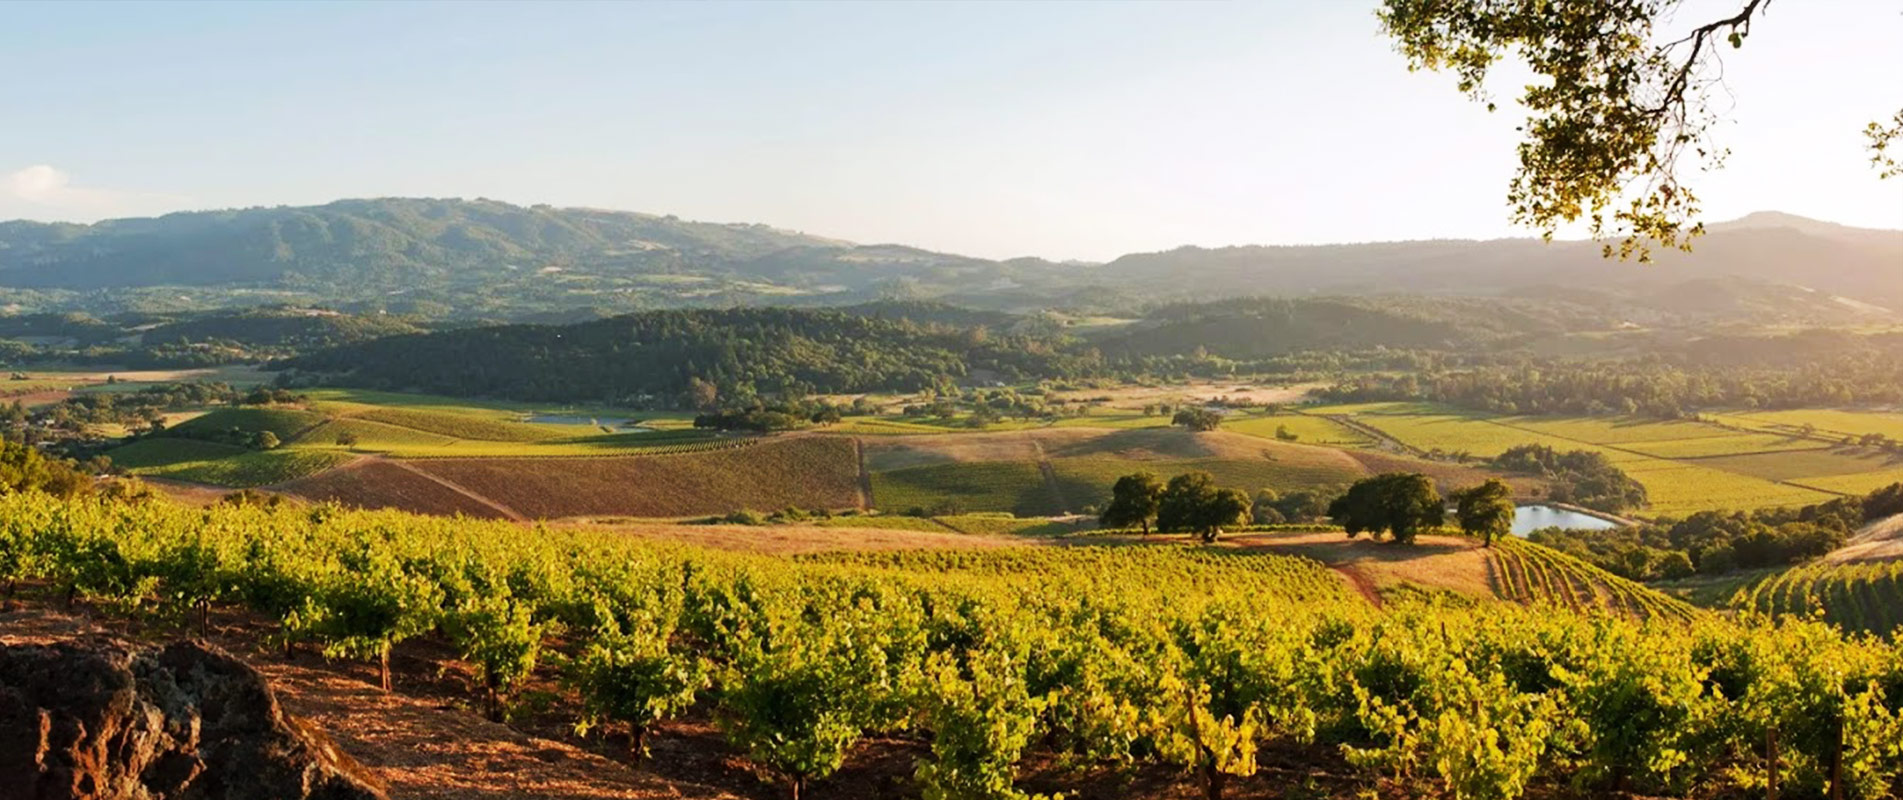 There are over 400 wineries in the Napa Valley alone!